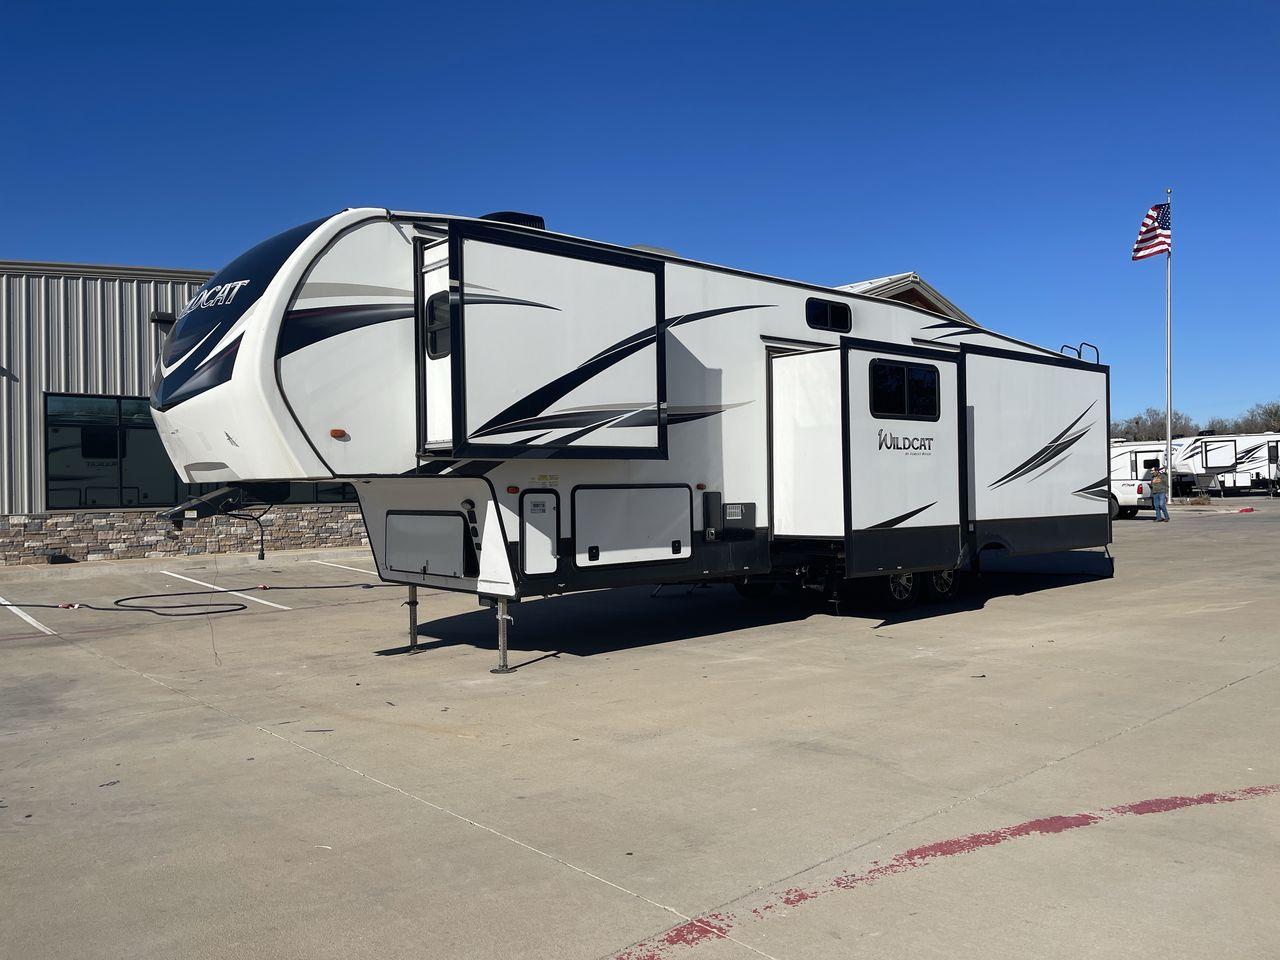 2020 FOREST RIVER WILDCAT 384MB (5ZT3WC3B2LG) , Length: 42.33 ft. | Dry Weight: 12,443 lbs. | Slides: 4 transmission, located at 4319 N Main St, Cleburne, TX, 76033, (817) 678-5133, 32.385960, -97.391212 - The 2020 Forest River Wildcat 384MB is a fifth wheel that epitomizes Forest River's dedication to innovation, quality, and crafting the perfect home on wheels. It offers a luxurious and versatile space for you and your loved ones. With a spacious quad-slide design with four slide-outs, this fifth wh - Photo #25